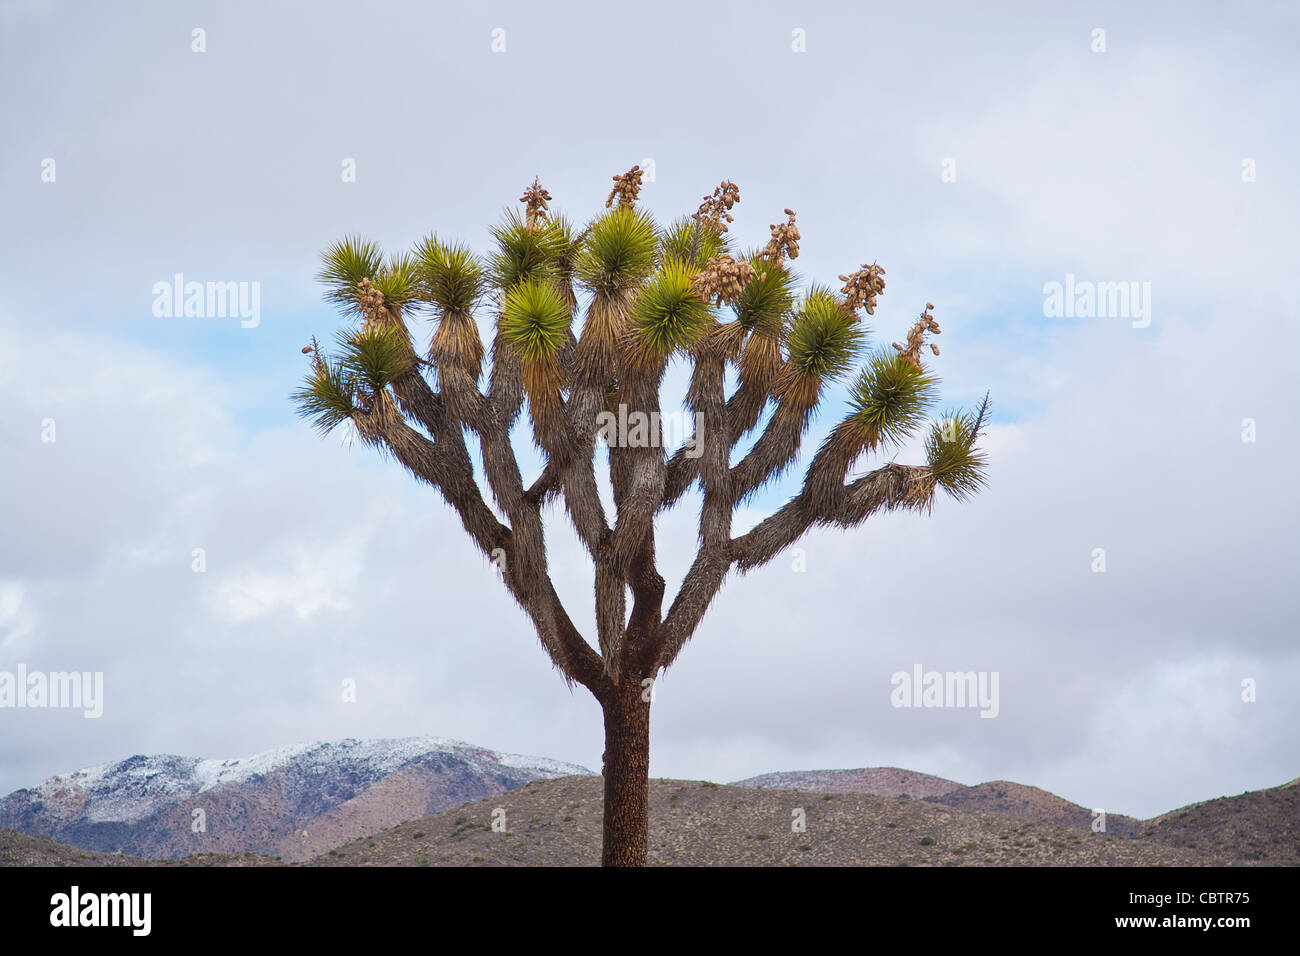 Joshua Tree stands against the clouds and the desert landscape in Joshua Tree National Park, California. Stock Photo